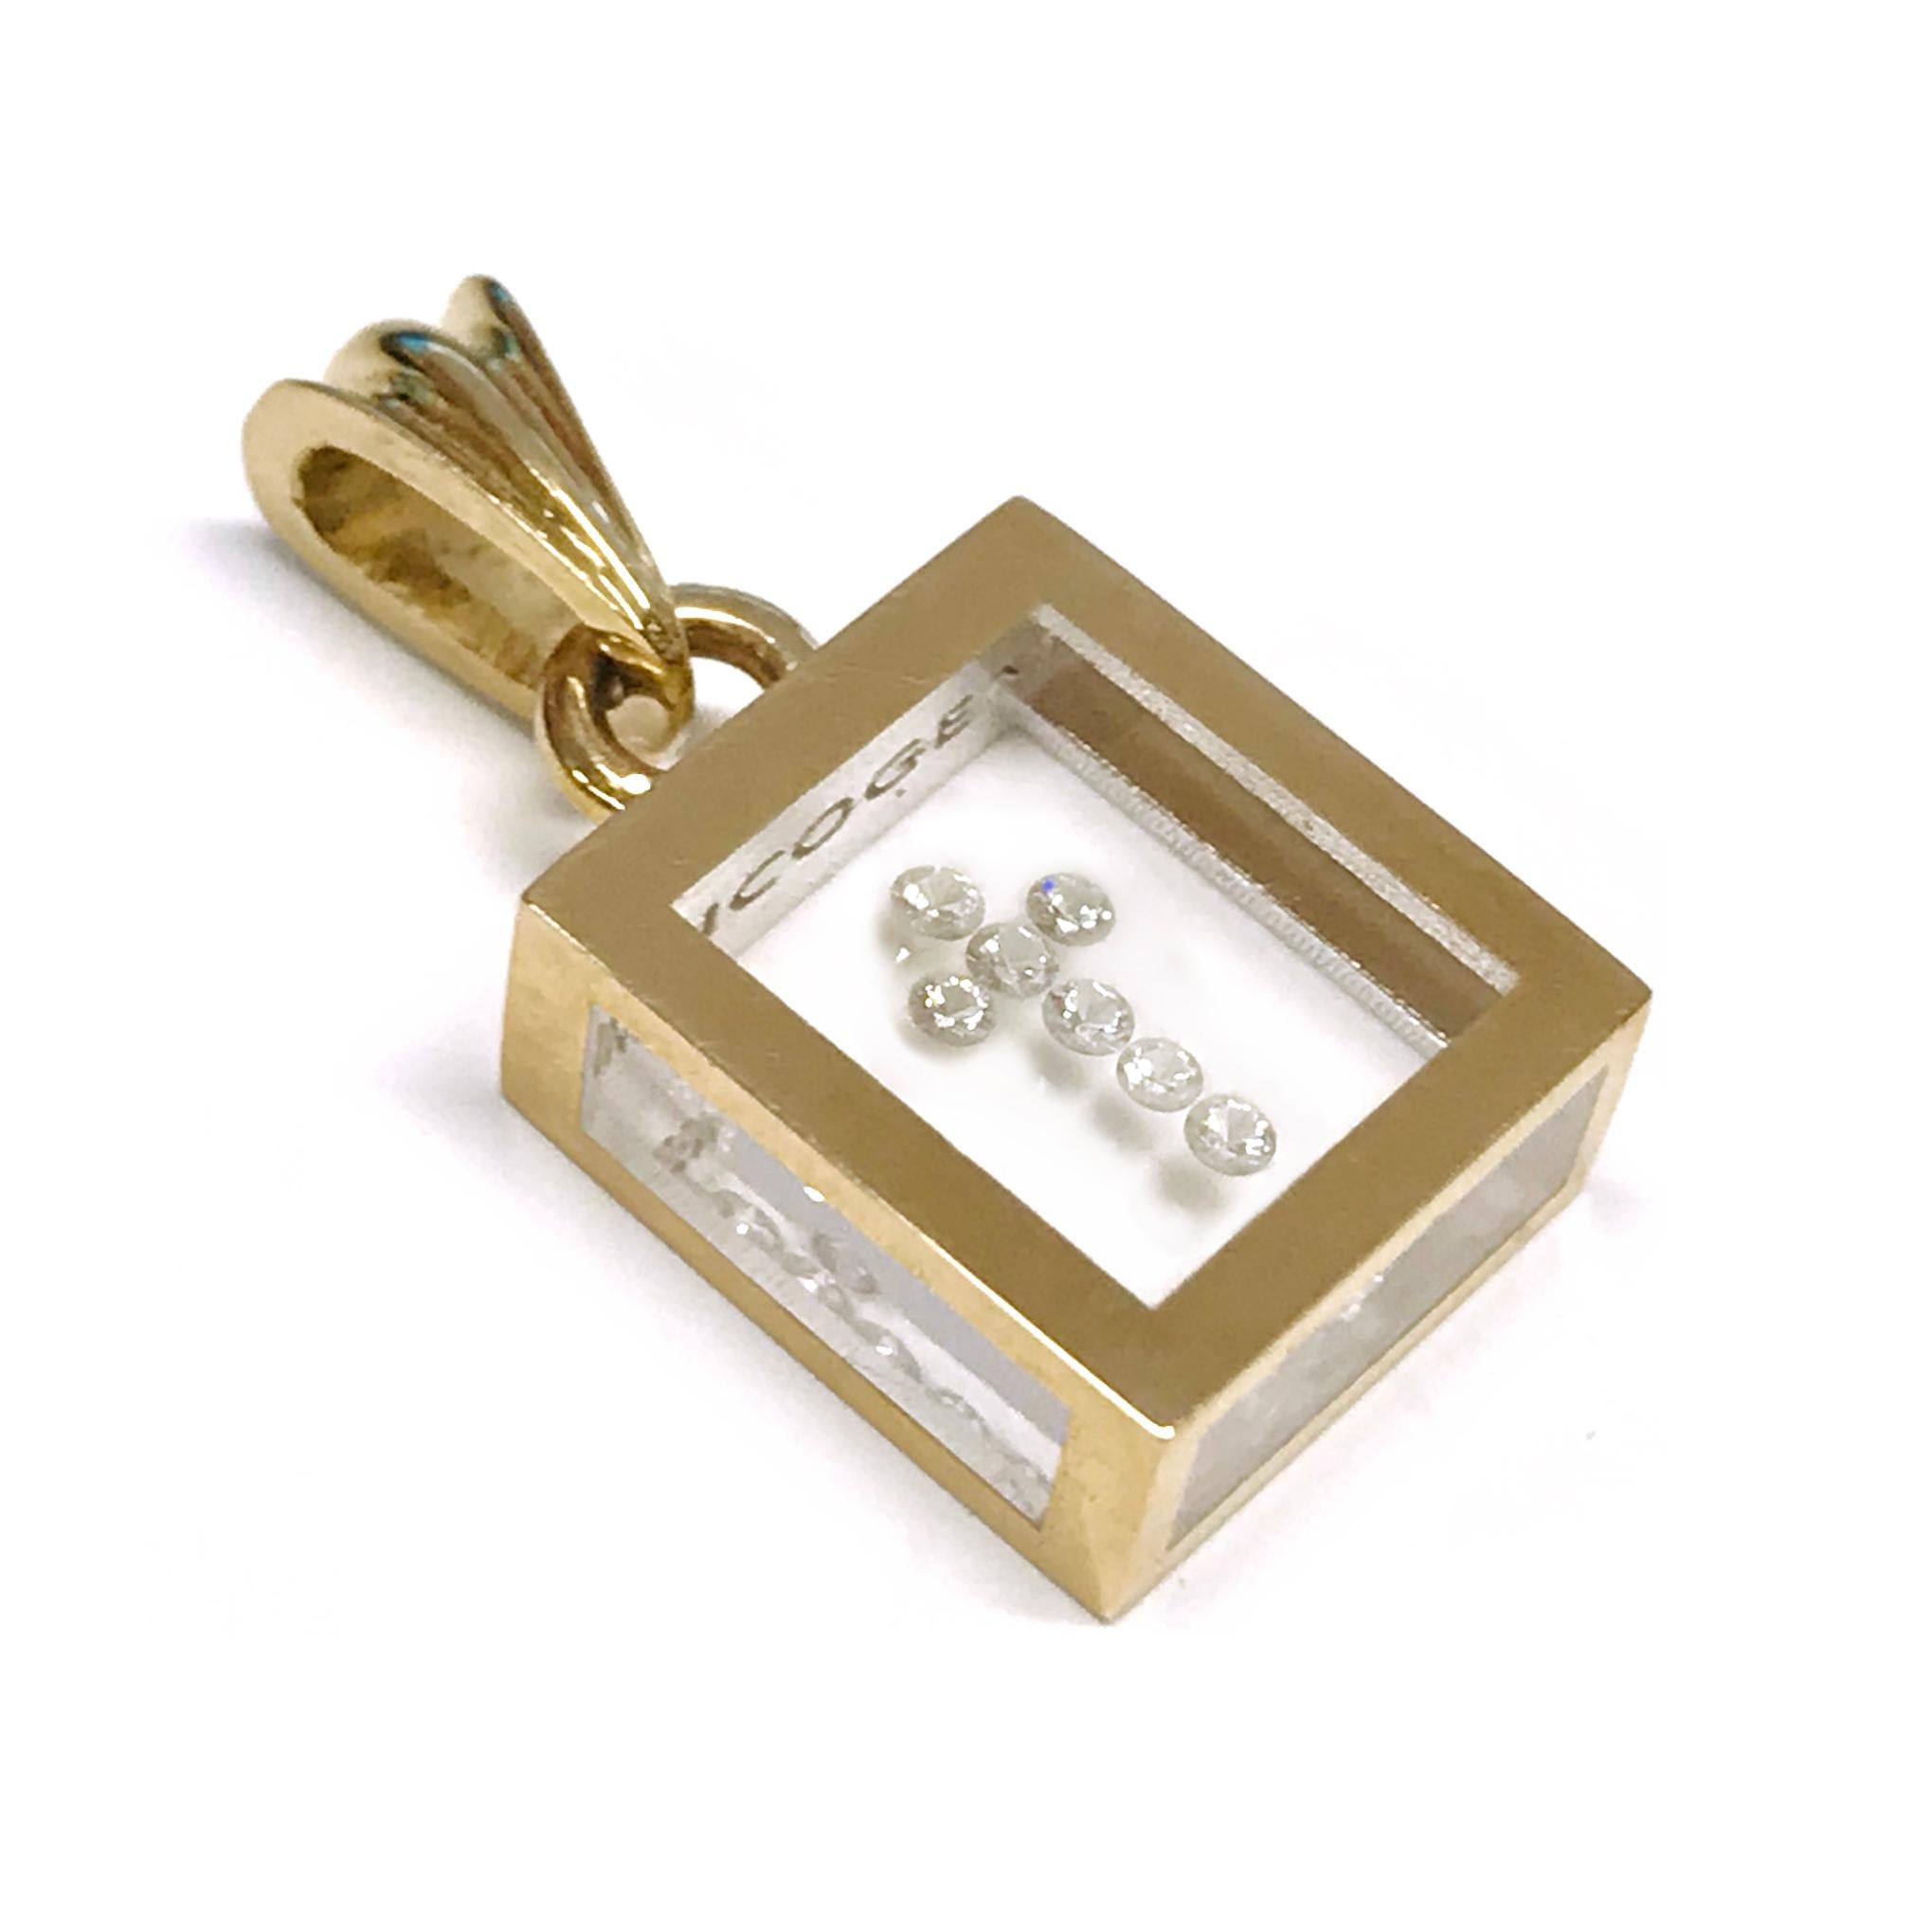 Incogem Floating Diamond Cross Pendant: 14k Yellow Gold. The pendant is handcrafted of recycled 14k yellow gold. The diamonds are brilliant-cut, 58 facets, VS1 in clarity (G.I.A.), and H in color (G.I.A.). Each diamond weighs 0.015 carat. The